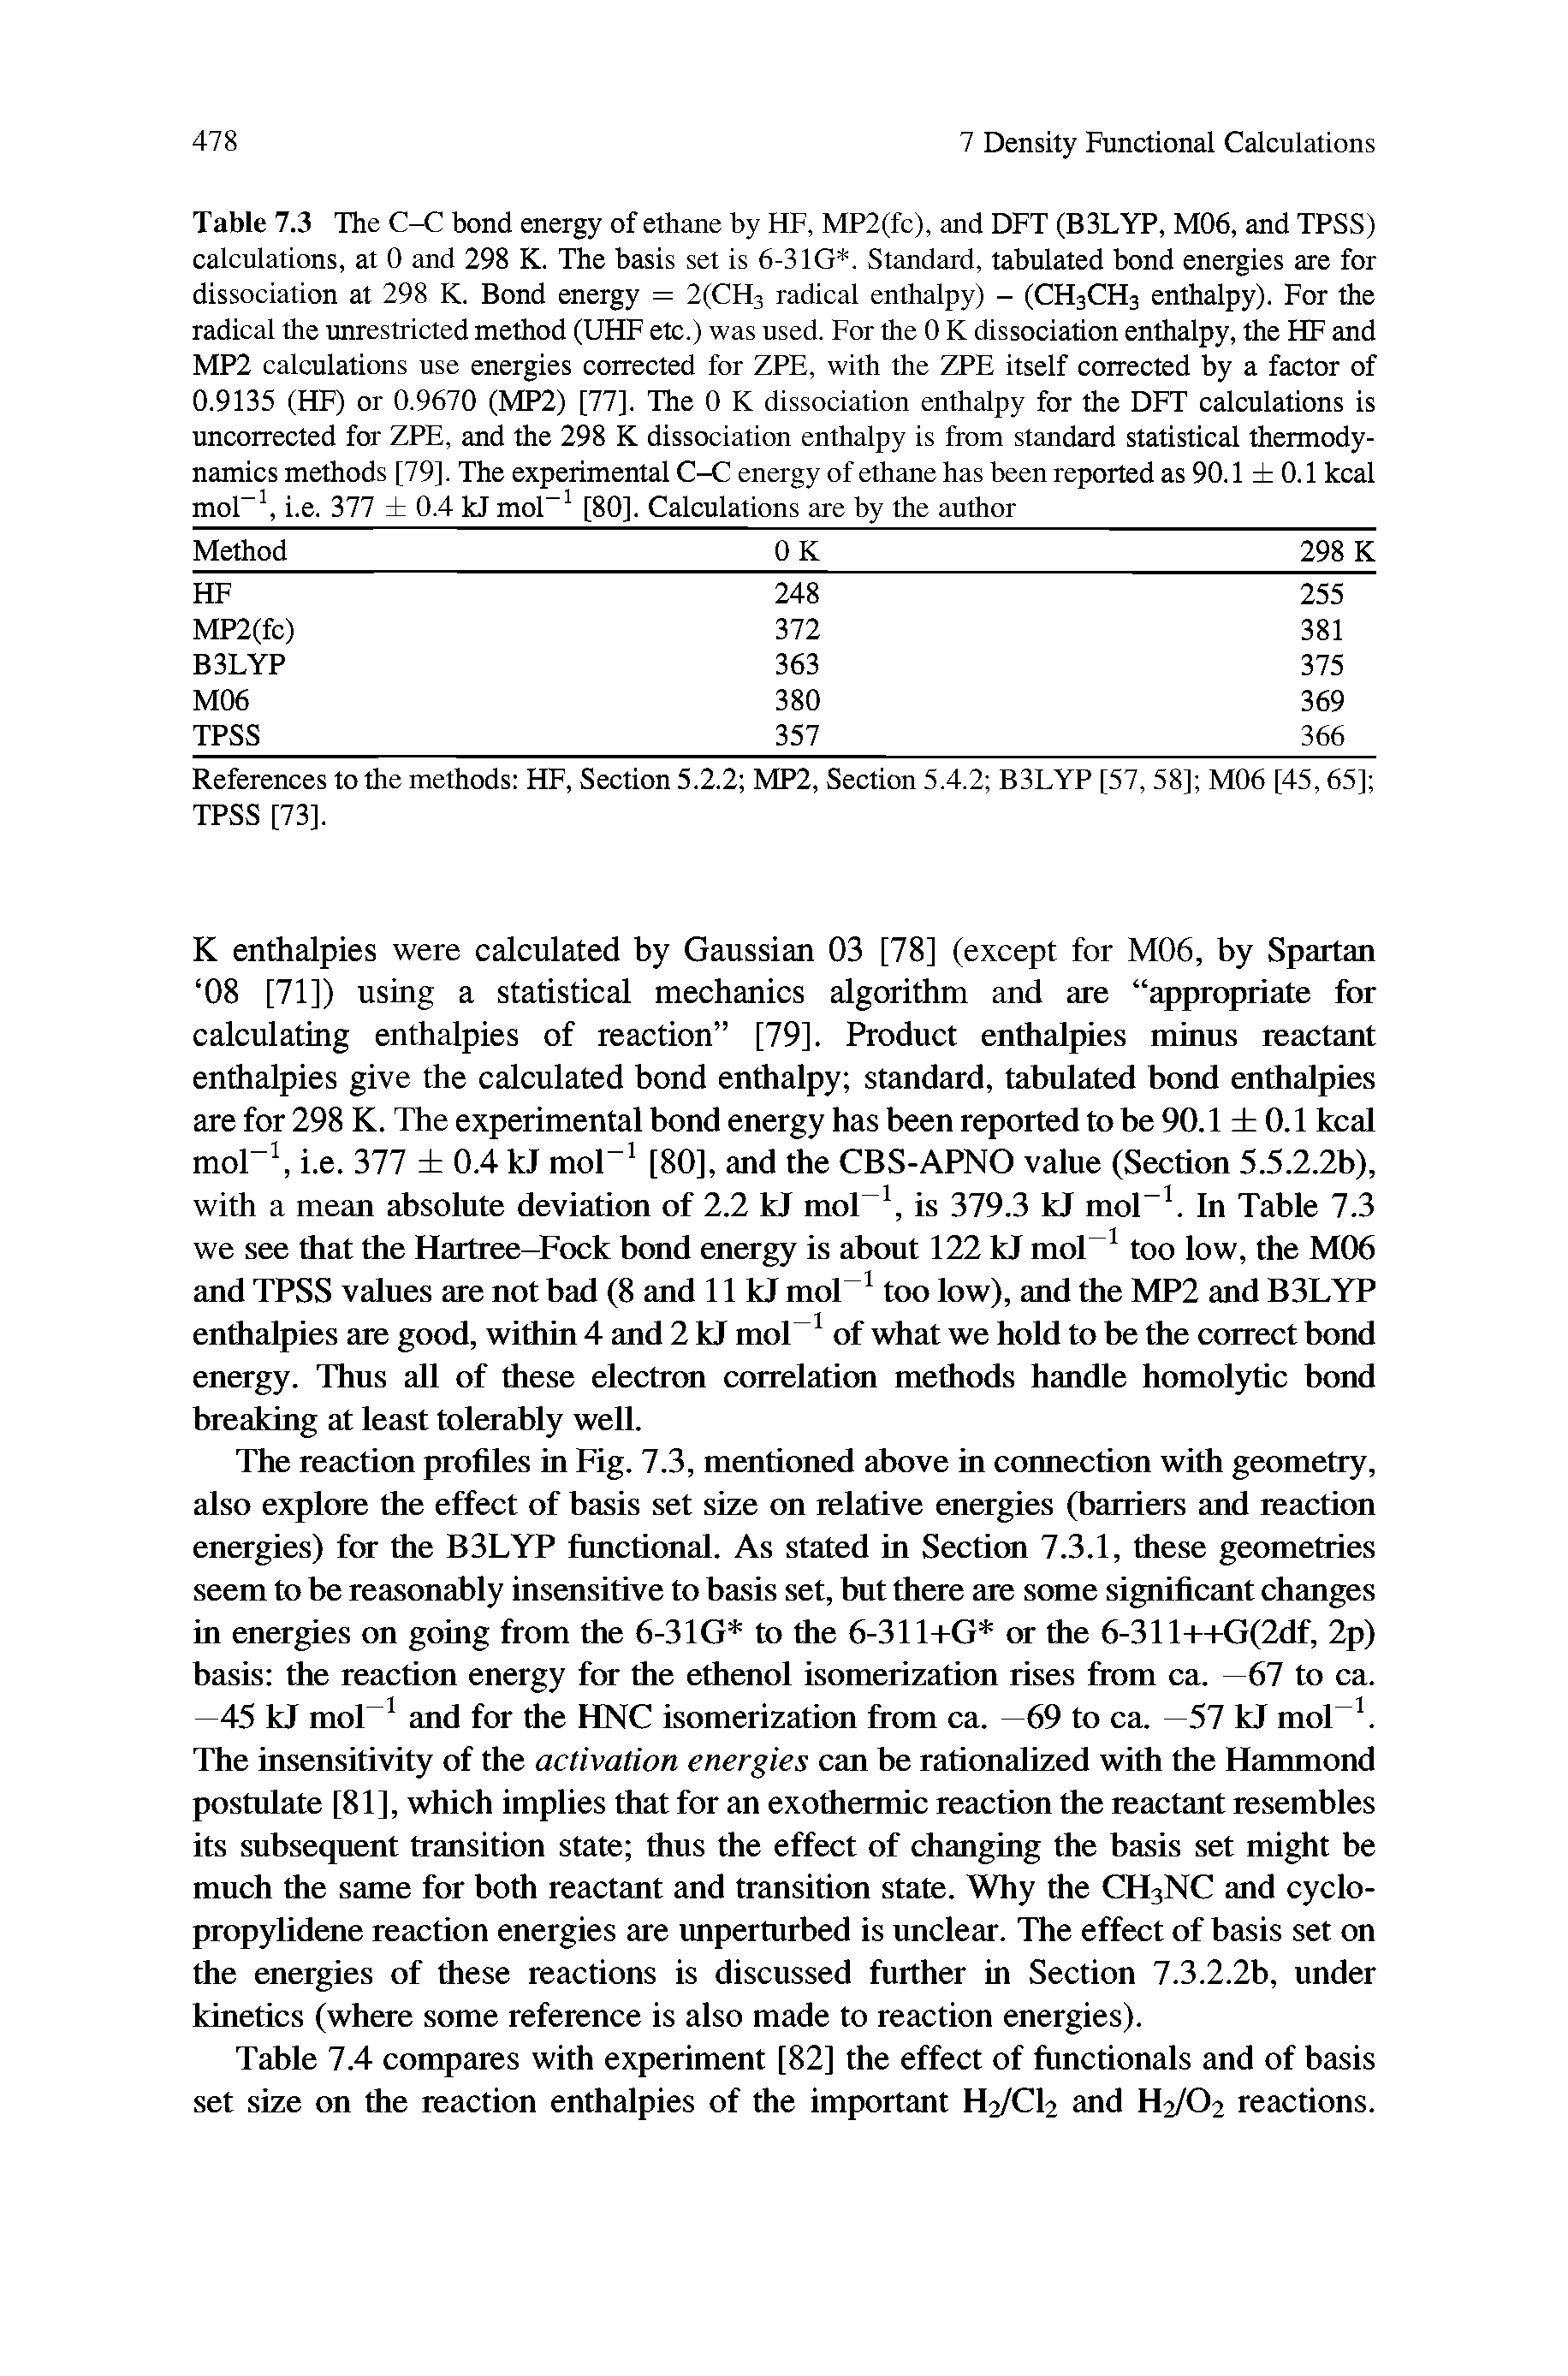 Table 7.3 The C-C bond energy of ethane by HF, MP2(fc), and DFT (B3LYP, M06, and TPSS) calculations, at 0 and 298 K. The basis set is 6-31G. Standard, tabulated bond energies are for dissociation at 298 K. Bond energy = 2(CH3 radical enthalpy) - (CH3CH3 enthalpy). For the radical the unrestricted method (UHF etc.) was used. For the 0 K dissociation enthalpy, the HF and MP2 calculations use energies corrected for ZPE, with the ZPE itself corrected by a factor of 0.9135 (HF) or 0.9670 (MP2) [77]. The 0 K dissociation enthalpy for the DFT calculations is uncorrected for ZPE, and the 298 K dissociation enthalpy is from standard statistical thermodynamics methods [79]. The experimental C-C energy of ethane has been reported as 90.1 0.1 kcal mol-1, i.e. 377 0.4 kJ mol-1 [80]. Calculations are by the author...